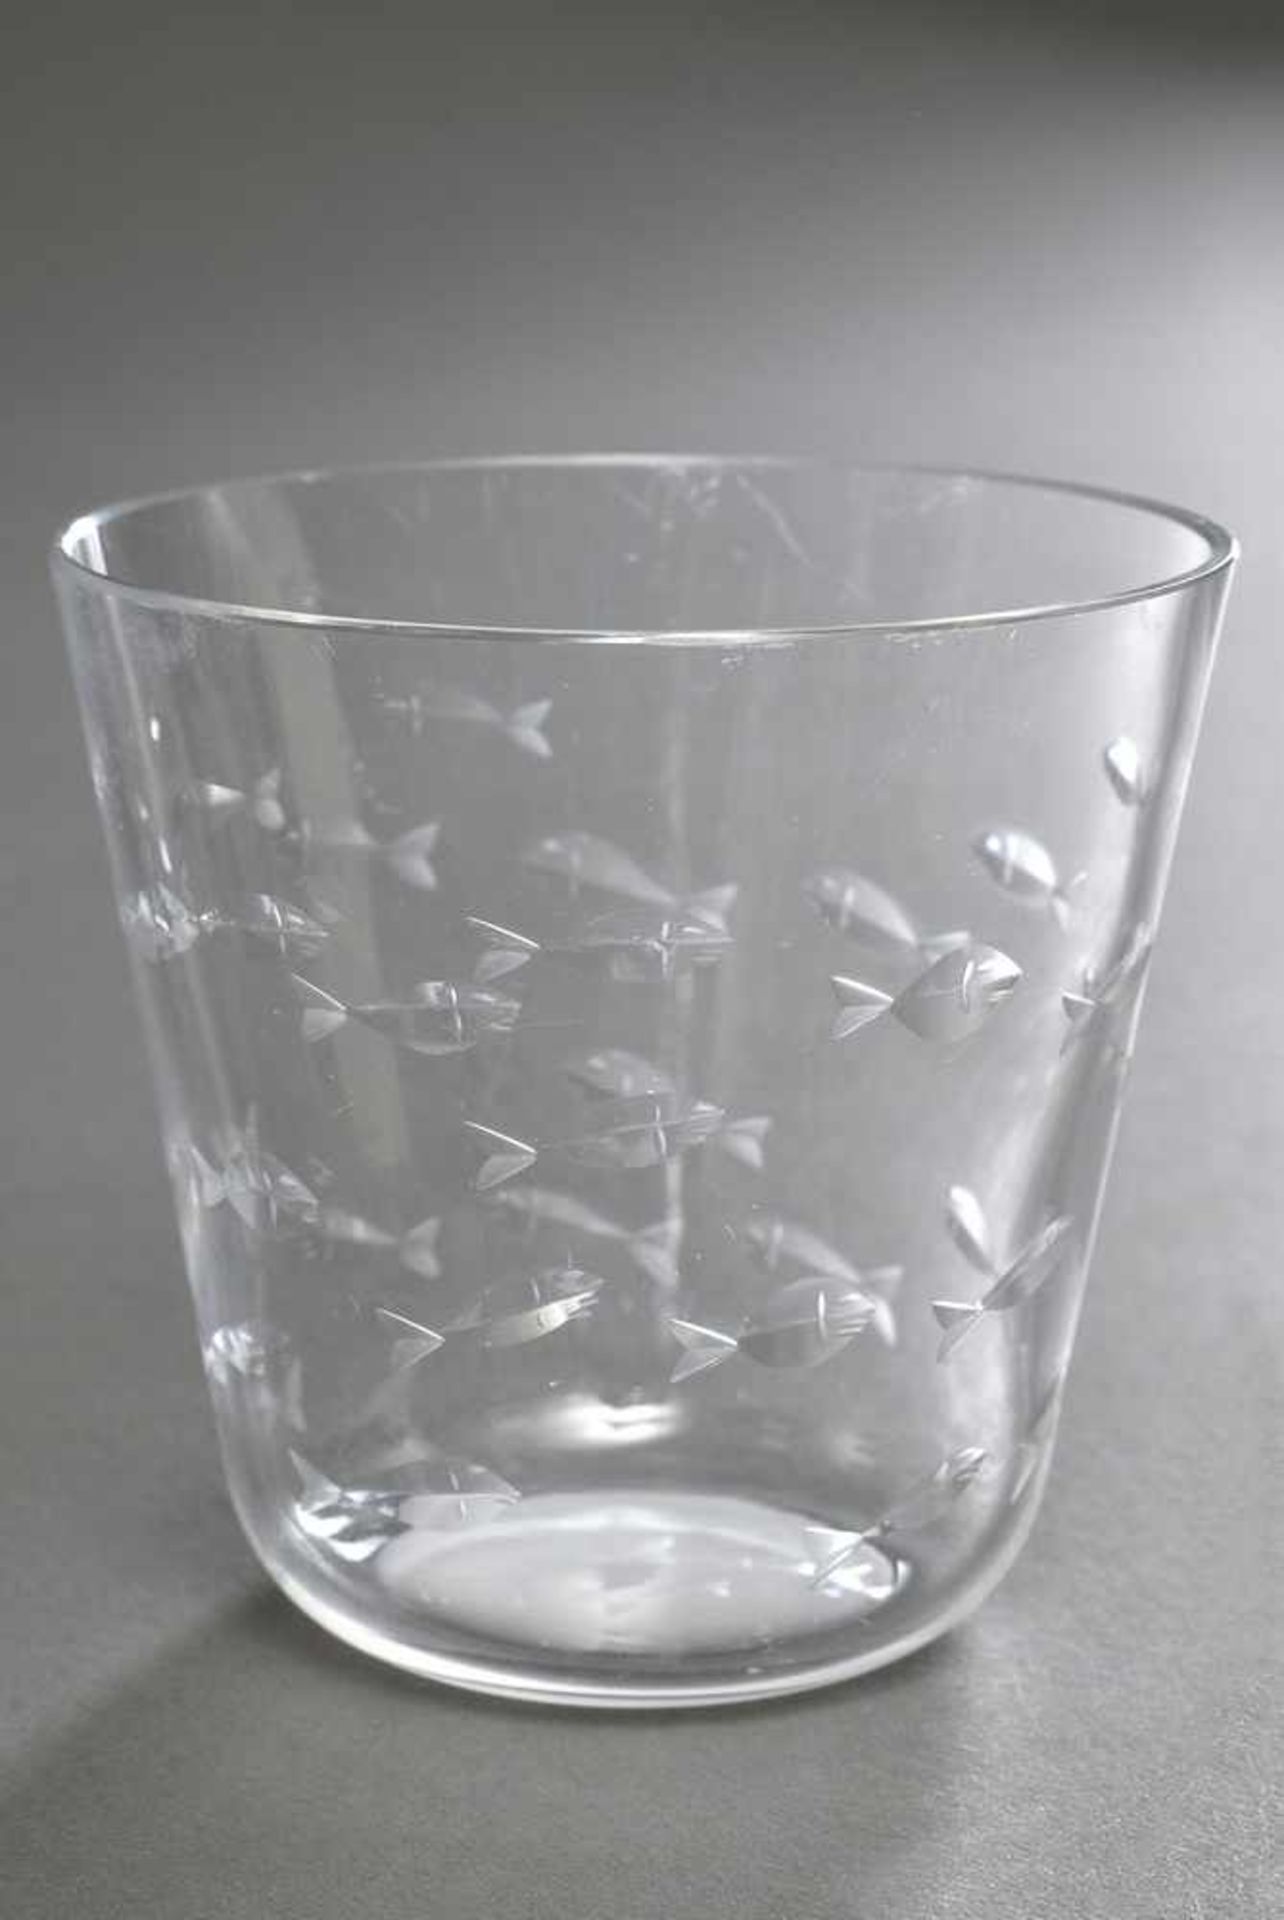 Farbloses Rotter Glas "Fische", H. 8cm Colorless Rotter Glass ''Fish'', H. 8cm